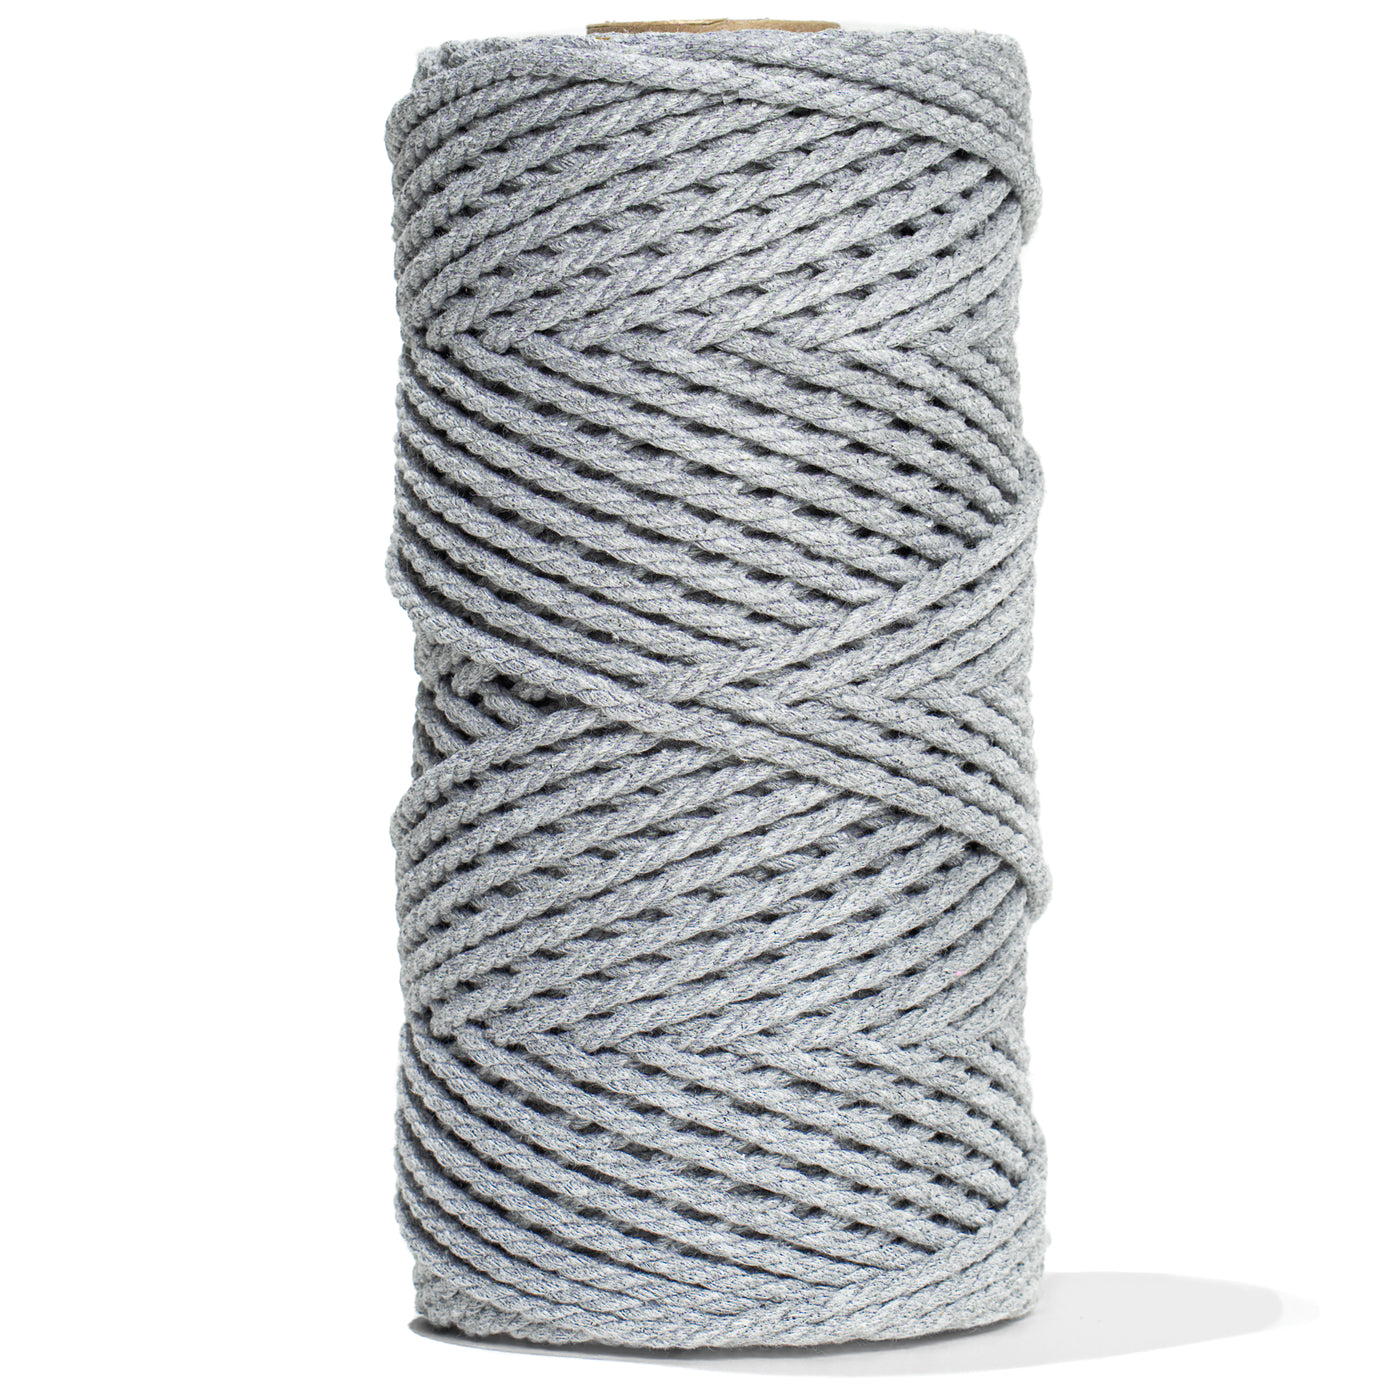 COTTON ROPE ZERO WASTE 3 MM - 3 PLY - HEATHER GRAY COLOR